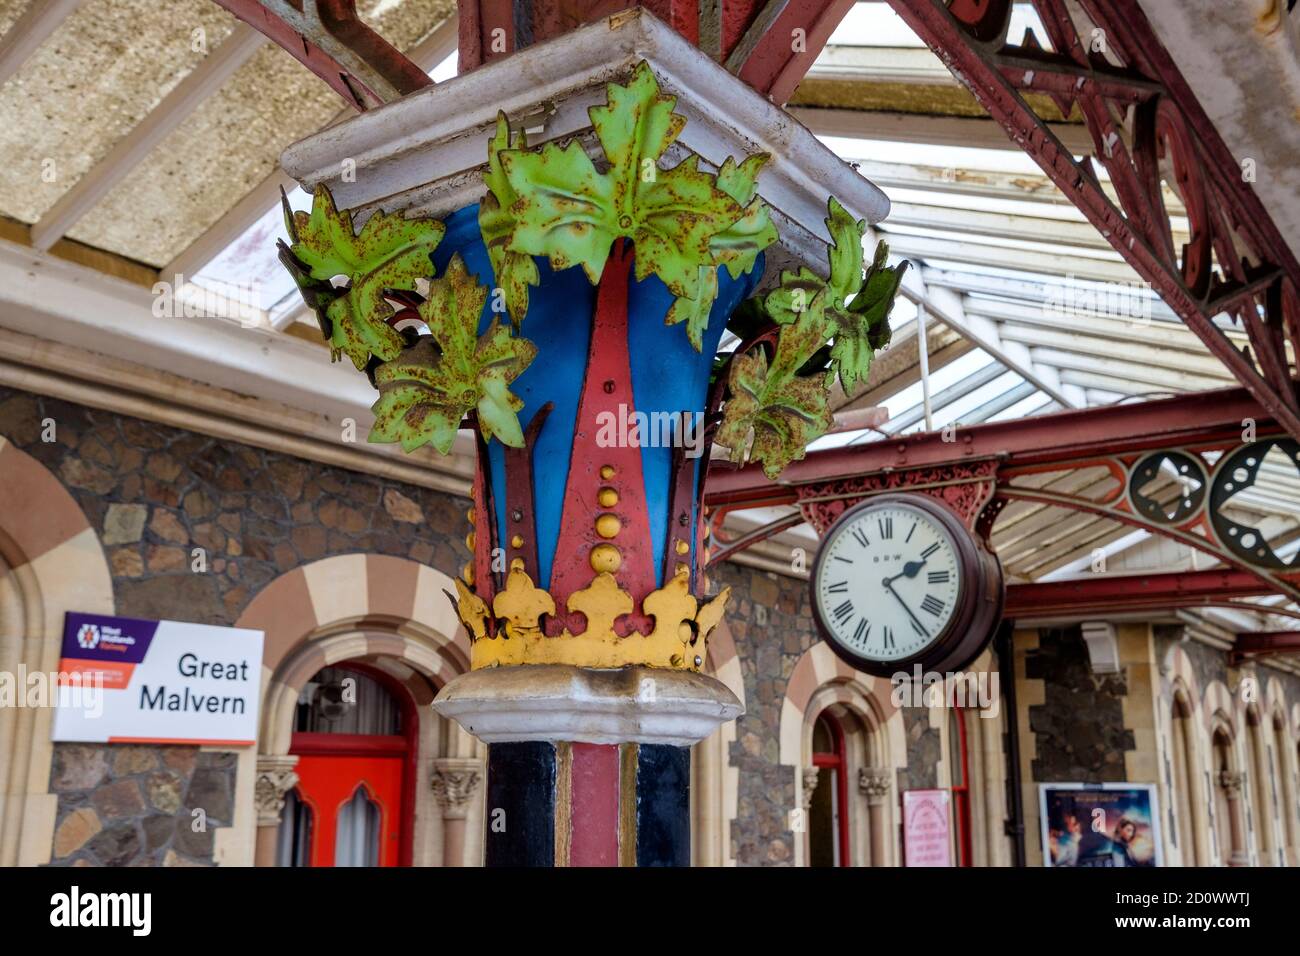 Great Malvern Railway Station floral capitals of the supports of the canopy roof built 1862 designed by Edmund Wallace Elmslie Stock Photo